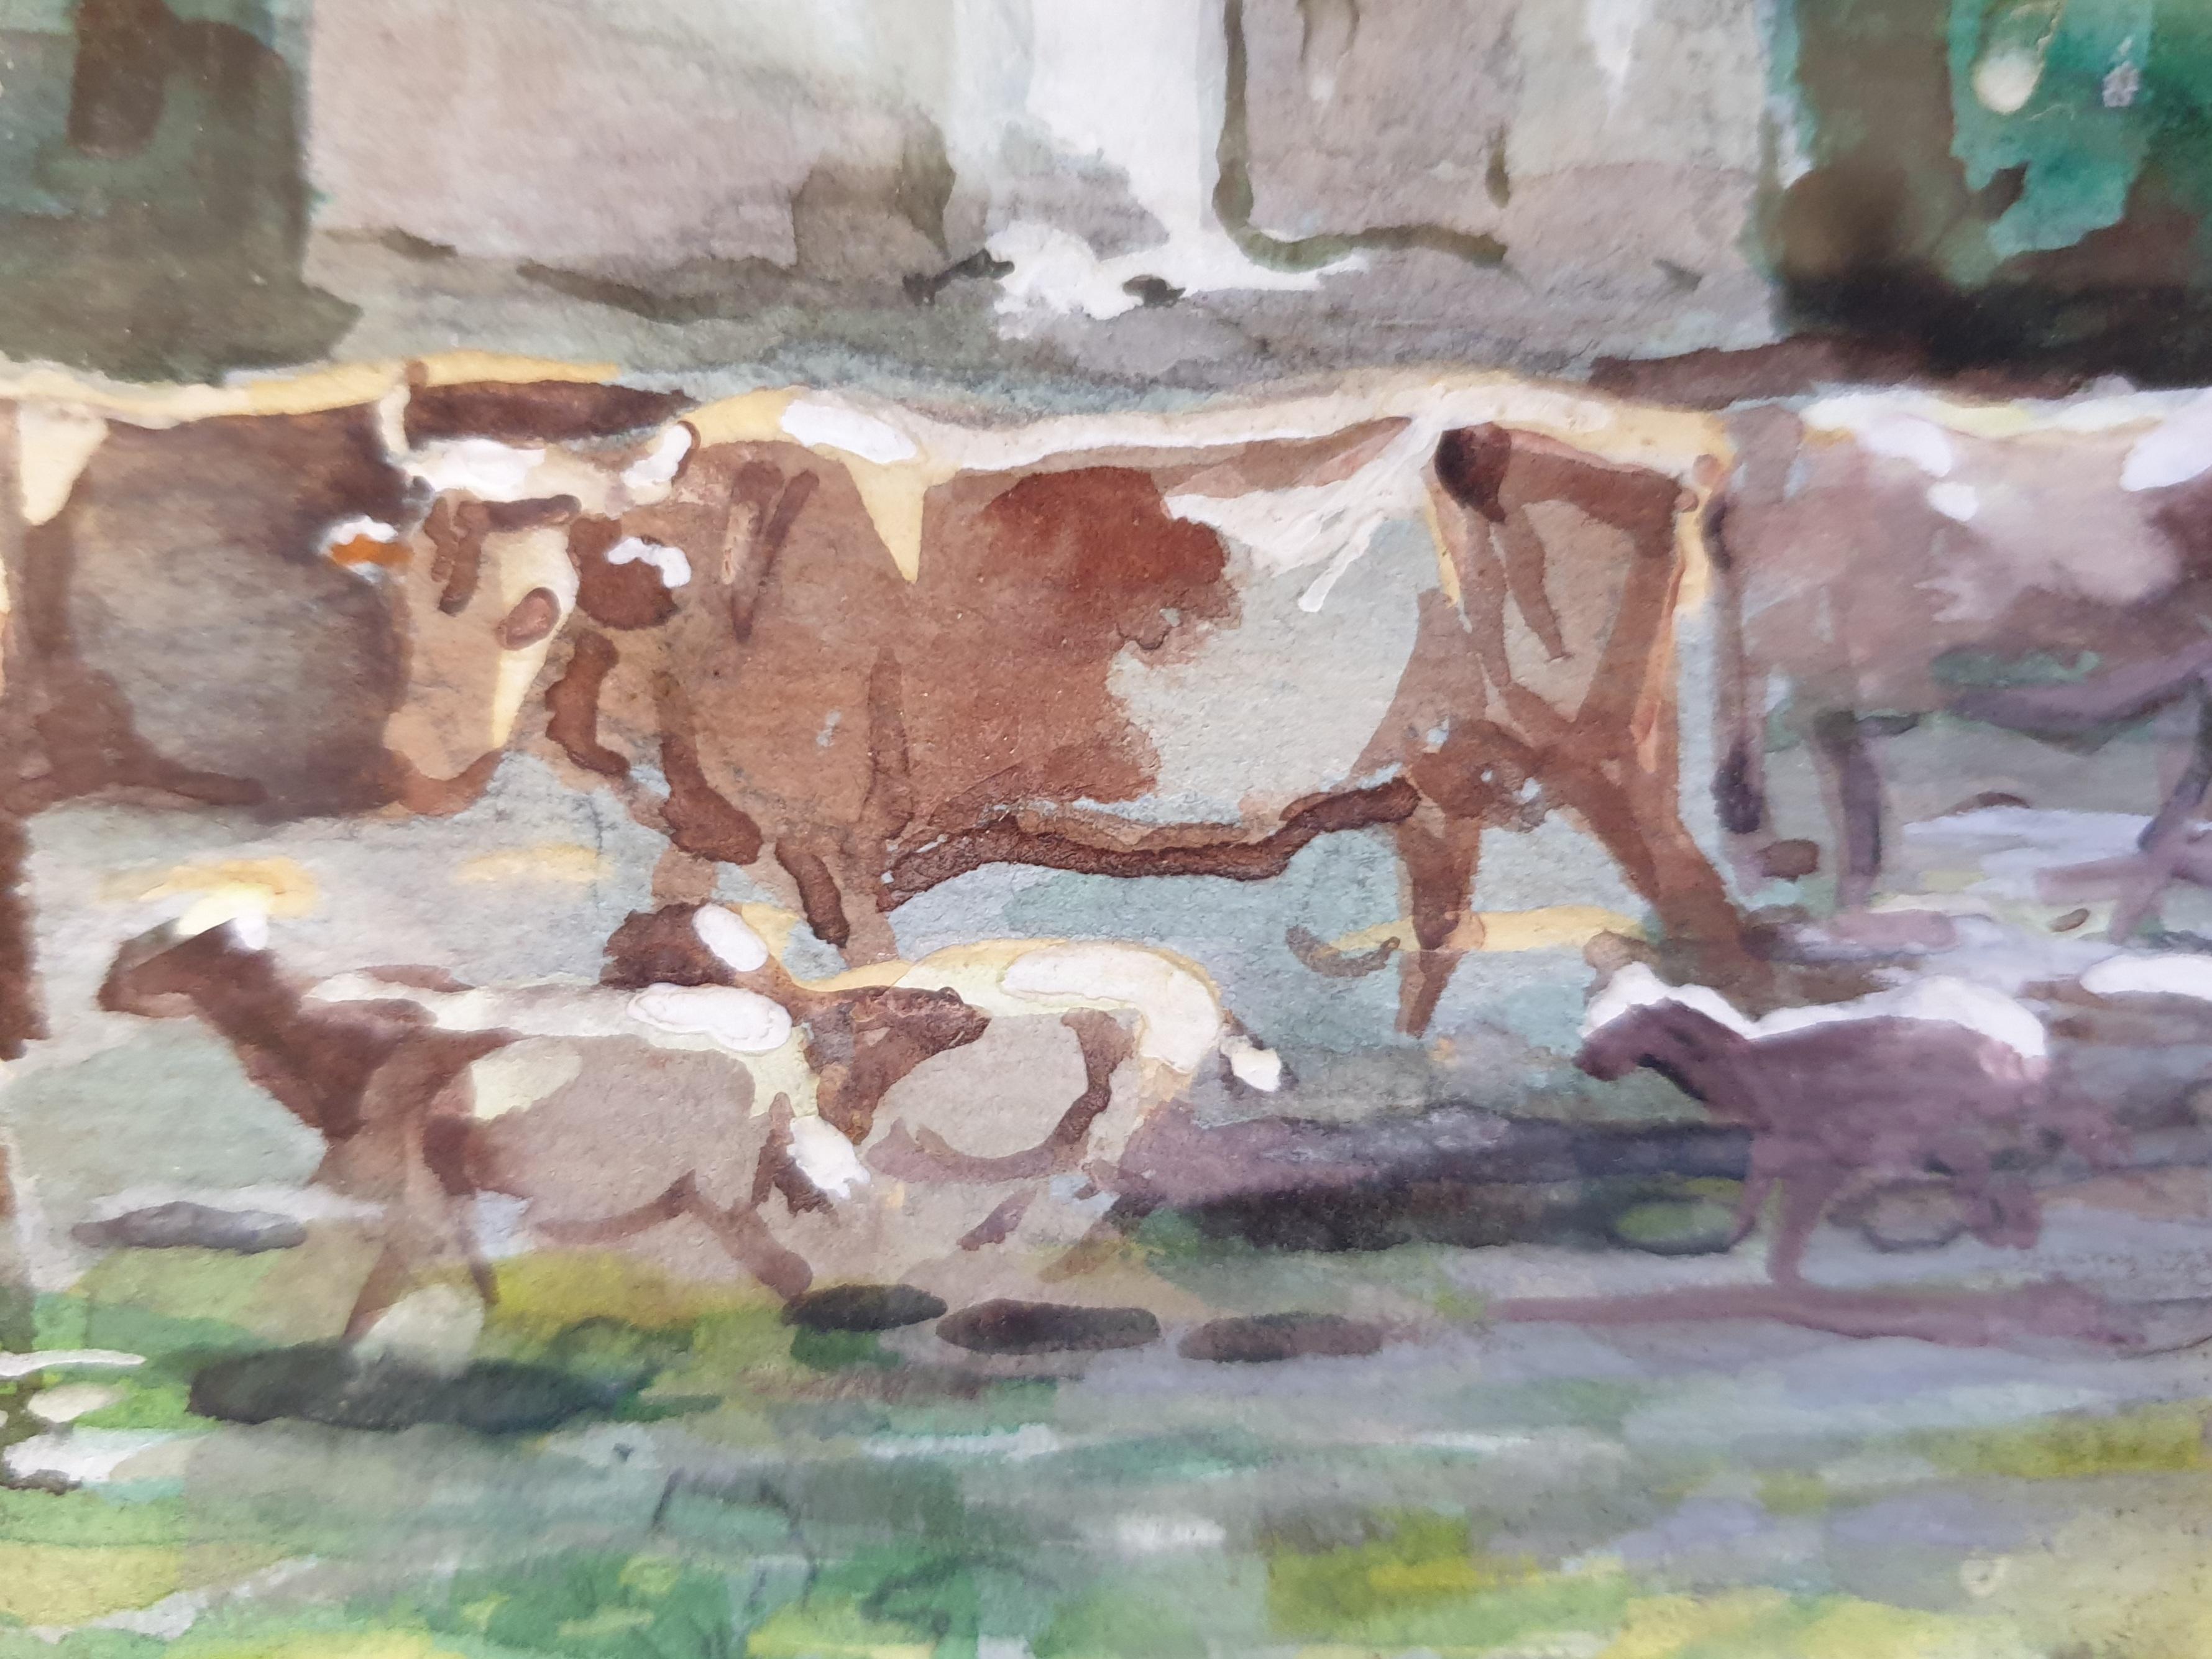 Cattle, Goats and Sheep Grazing, Orientalist Watercolour. - Realist Art by Aiveill